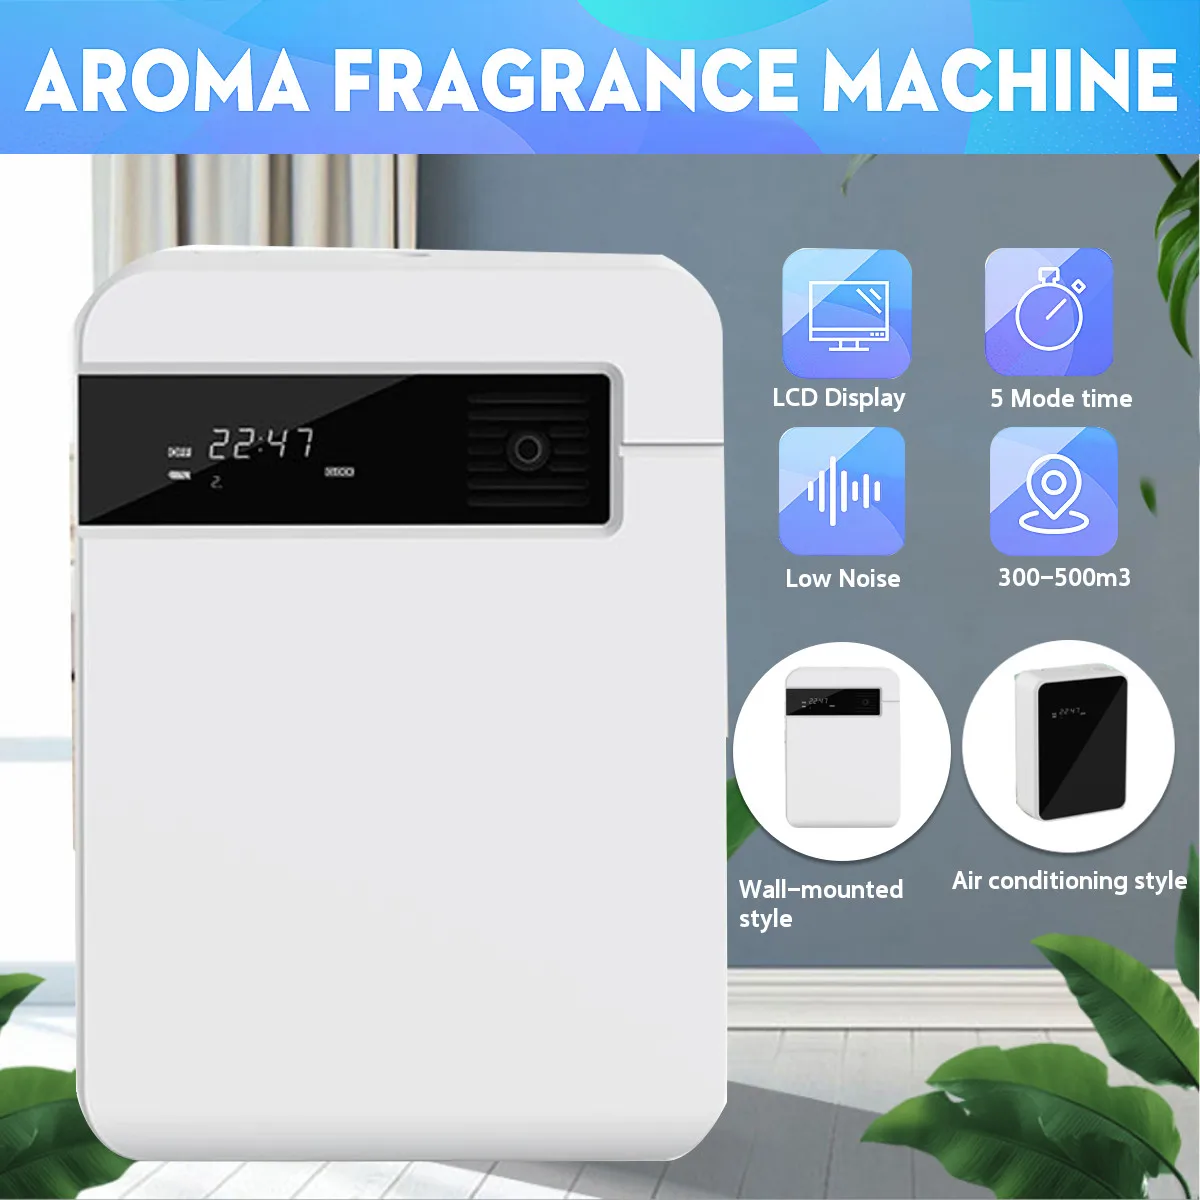 150ml Aroma Diffuser Sprayer Machine for Home Office Hotel Electric Aroma Essential Oil Diffuser Air Humidifier Air Purifier